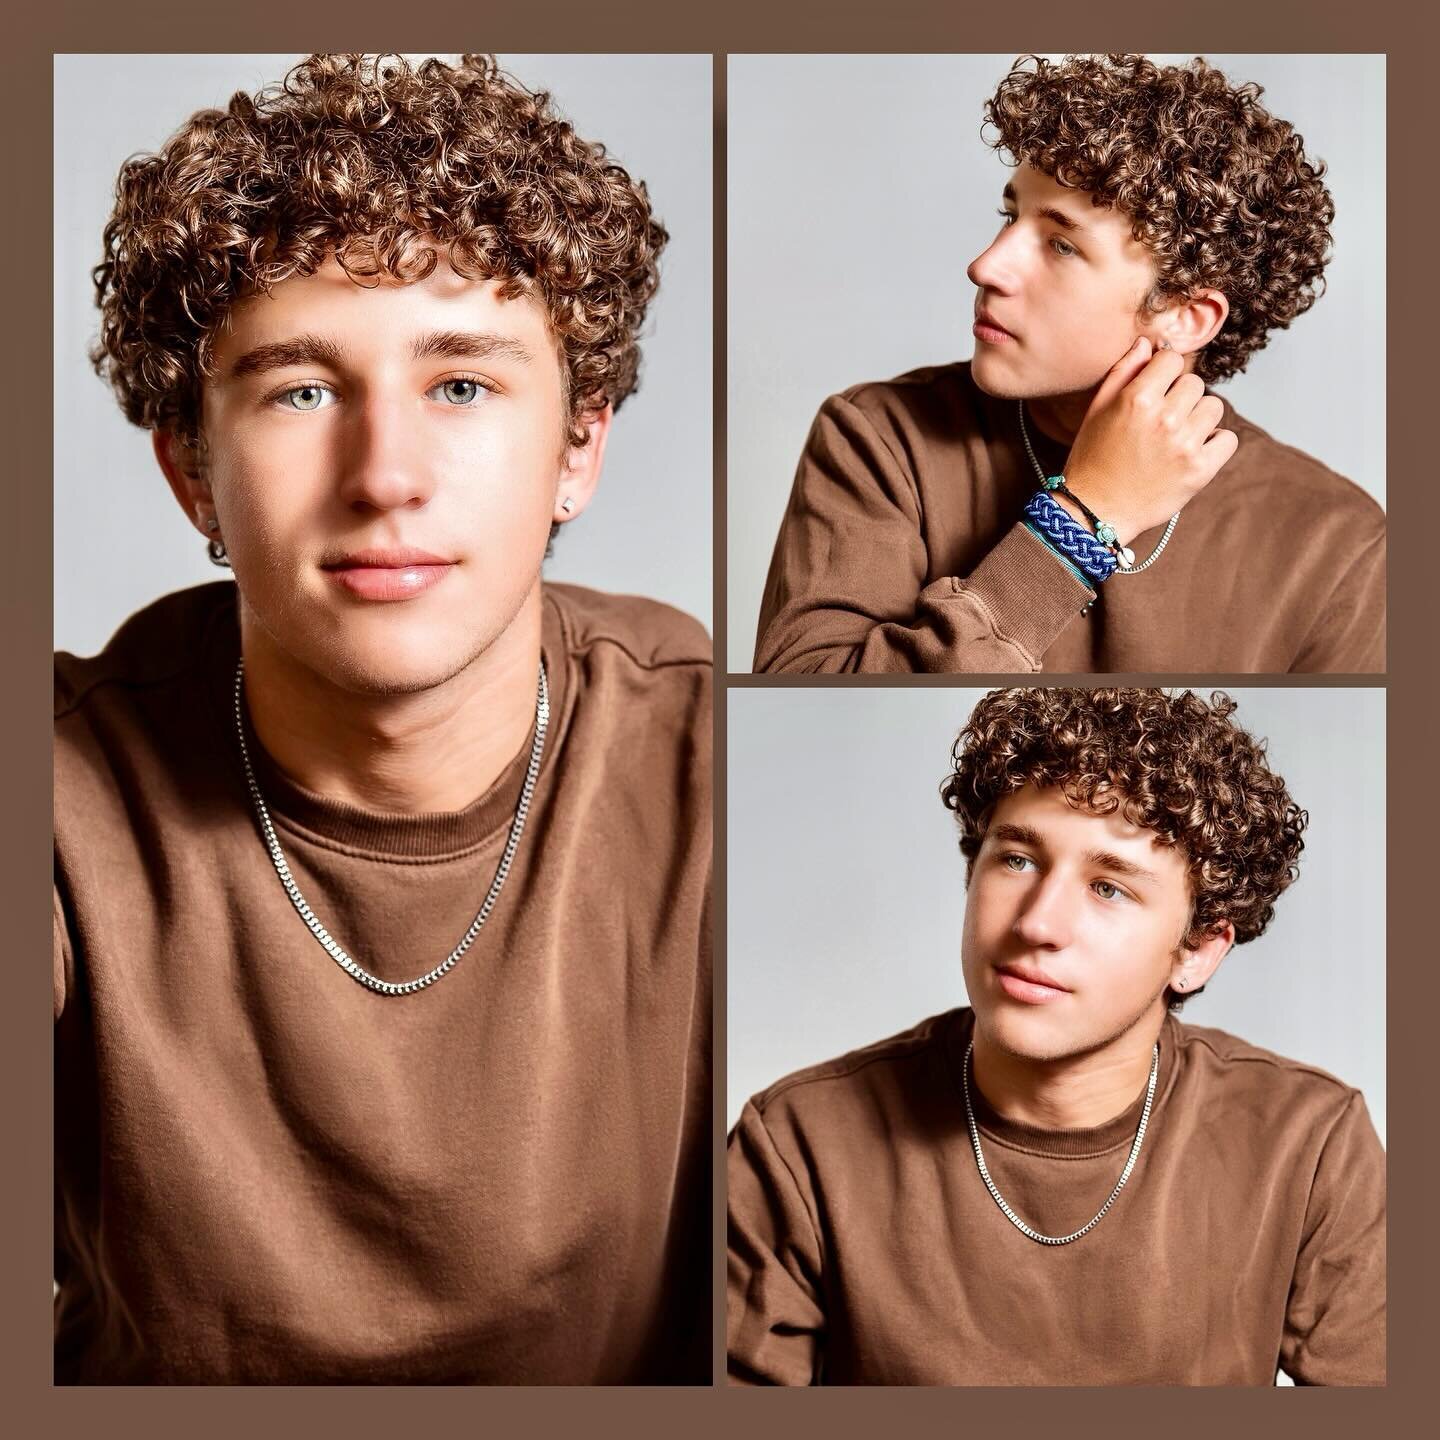 I love working with natural curly hair ➿How handsome is Cindy&rsquo;s client Connor 🩵 @theartistryofjustcin #theartistry2020nj #redken #redkenobsessed #redkensalon #ittakesapro #njhairsalon #njhairstylist #njcolorist #licensedtocreate #americansalon